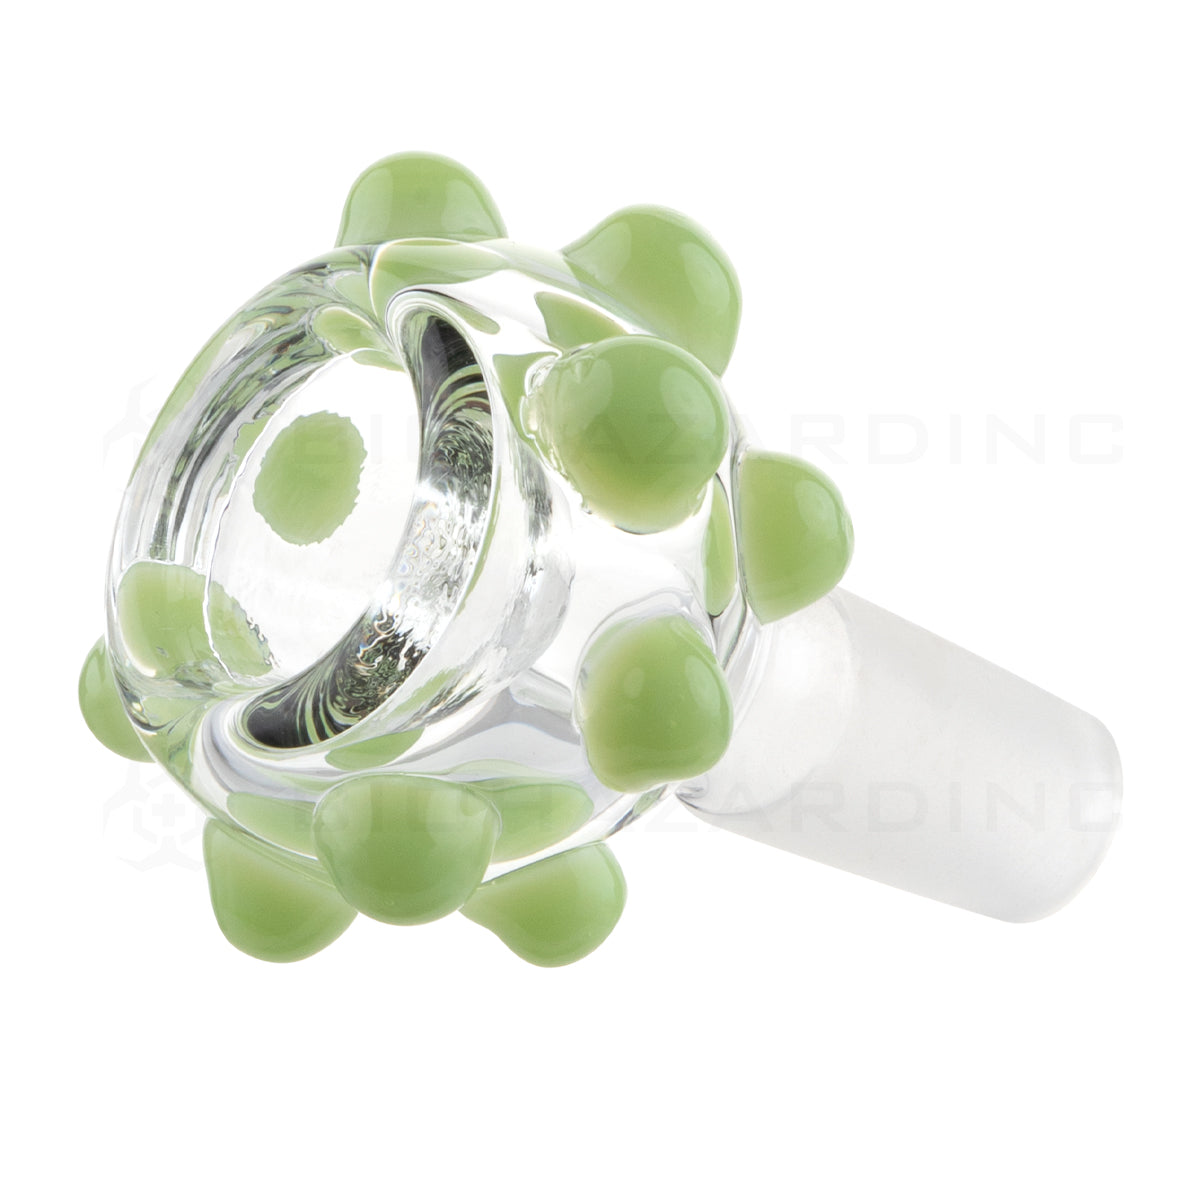 Bowl | Slyme Marbles Glass Bowls | 14mm - Glass - 4 Count Glass Bowl Biohazard Inc   